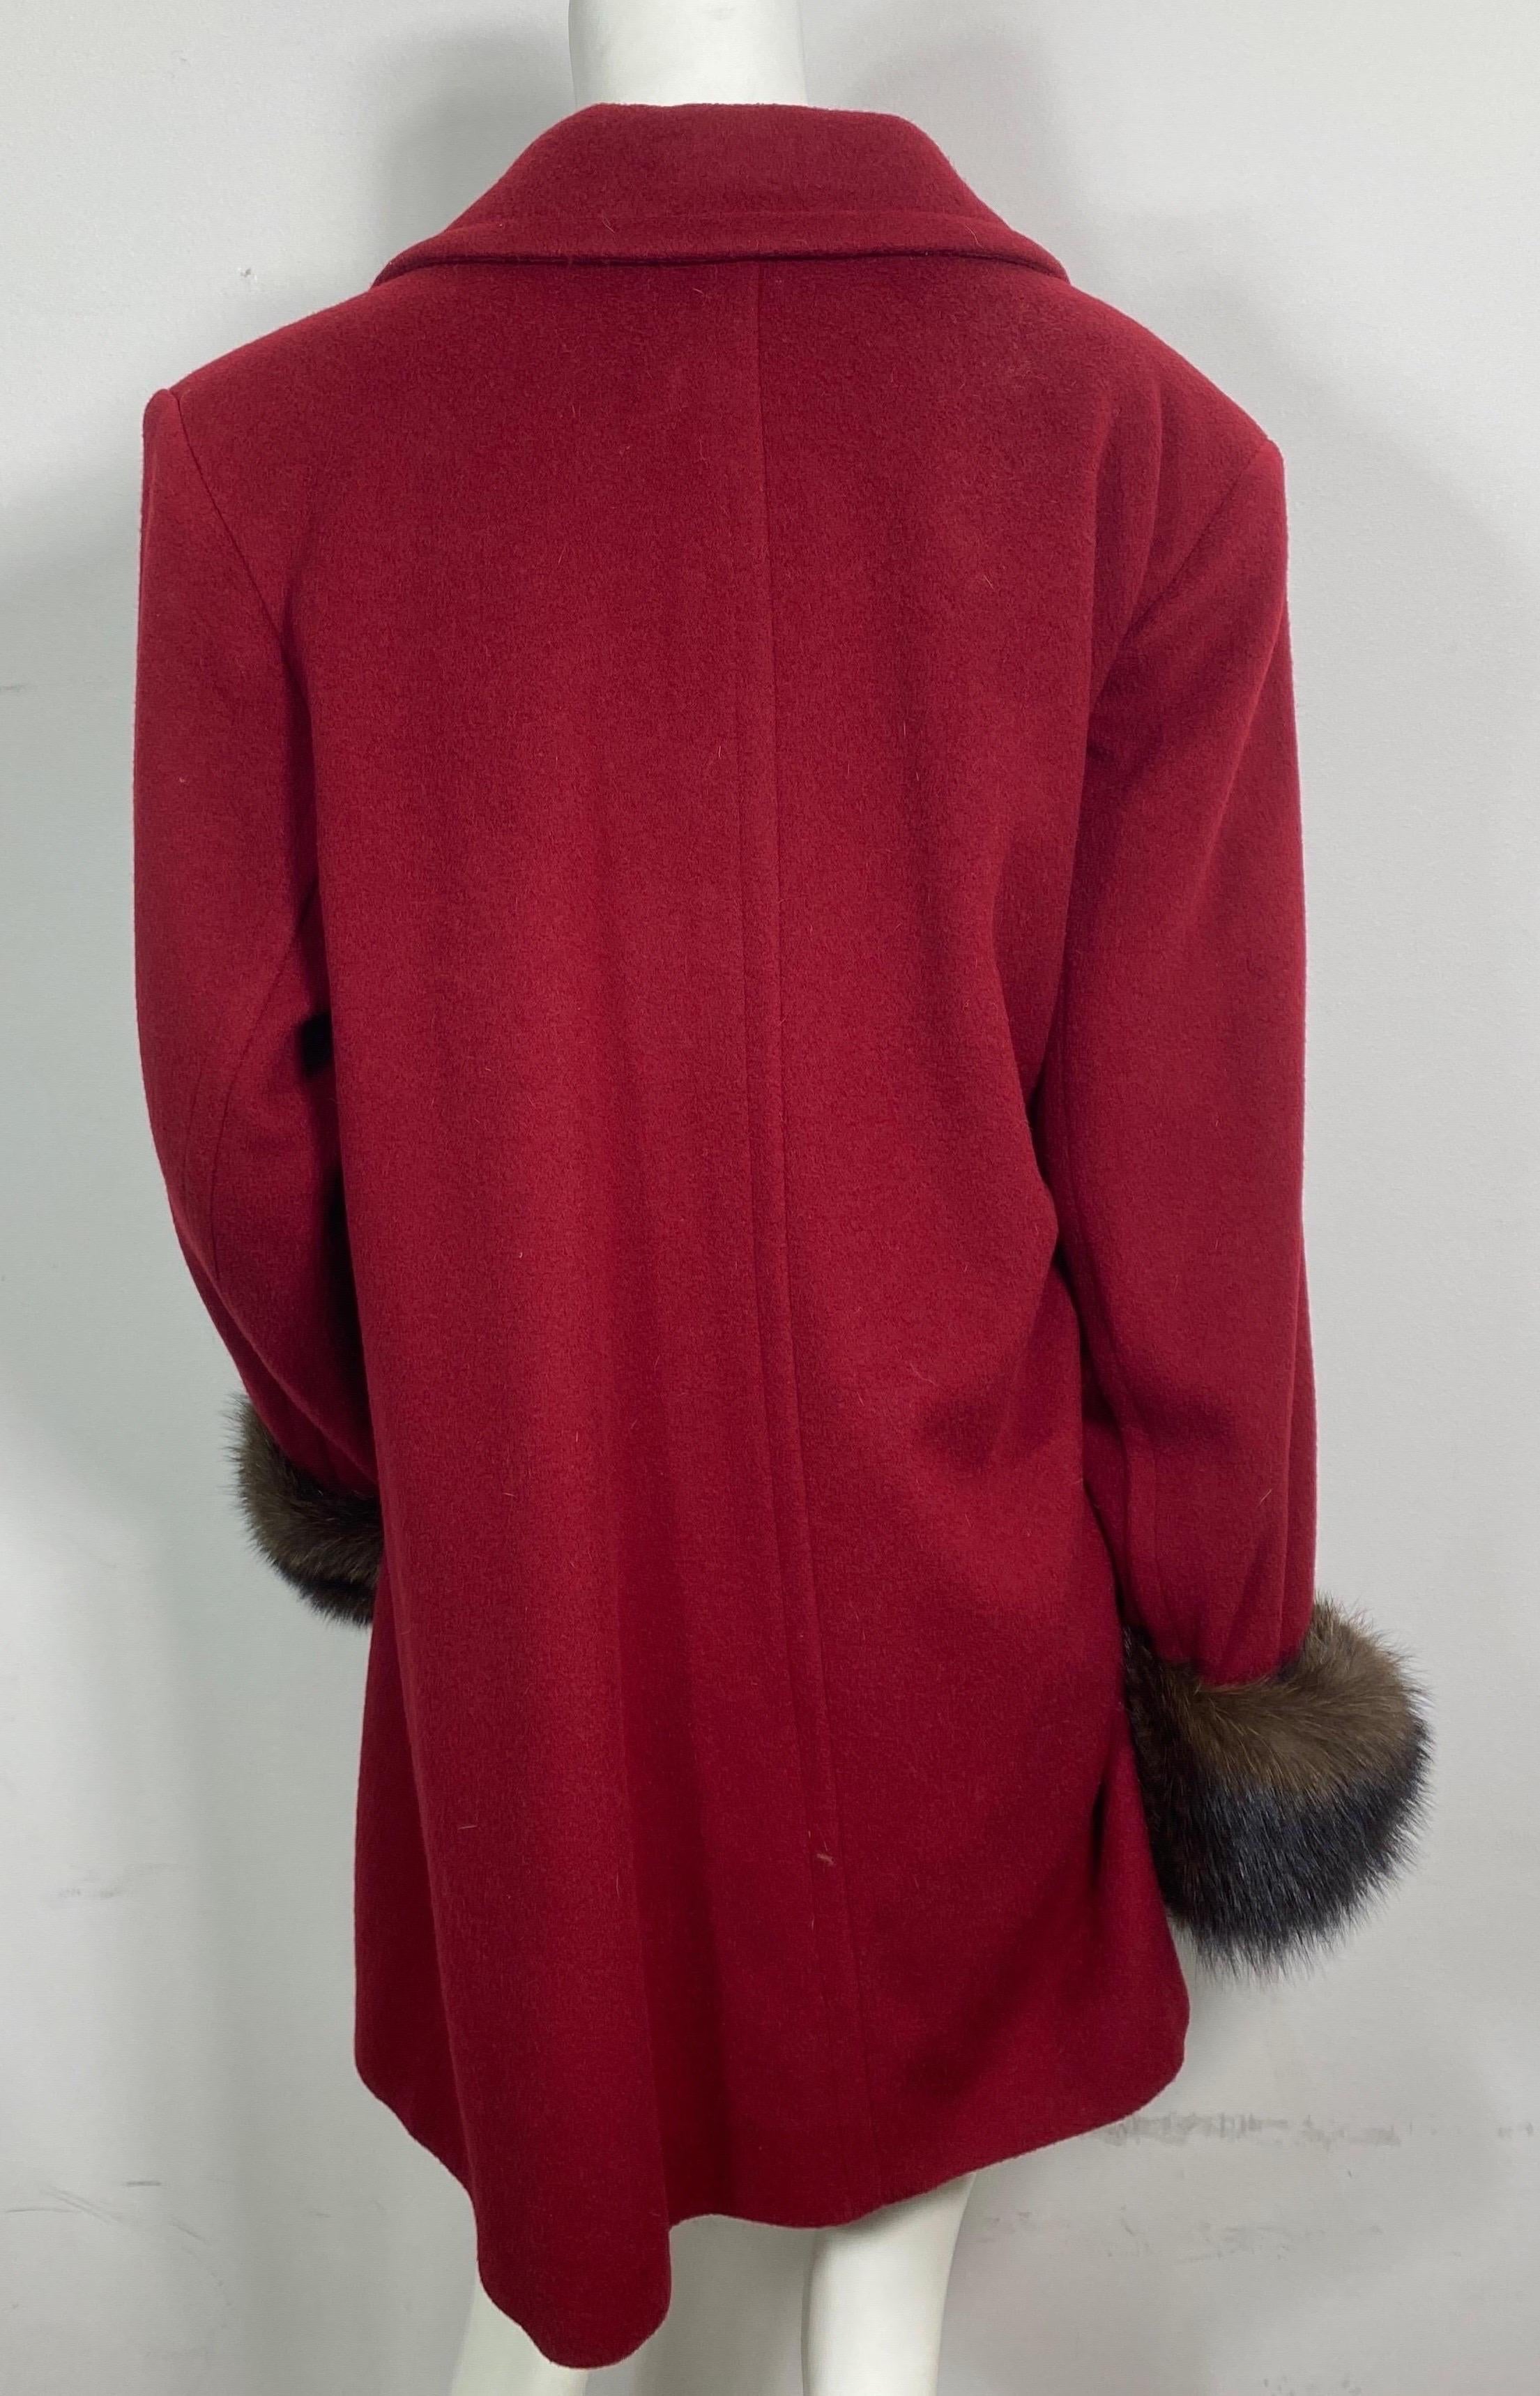 Yves Saint Laurent 1990’s Garnet Cashmere and Fox Swing Coat -Size Large  For Sale 8